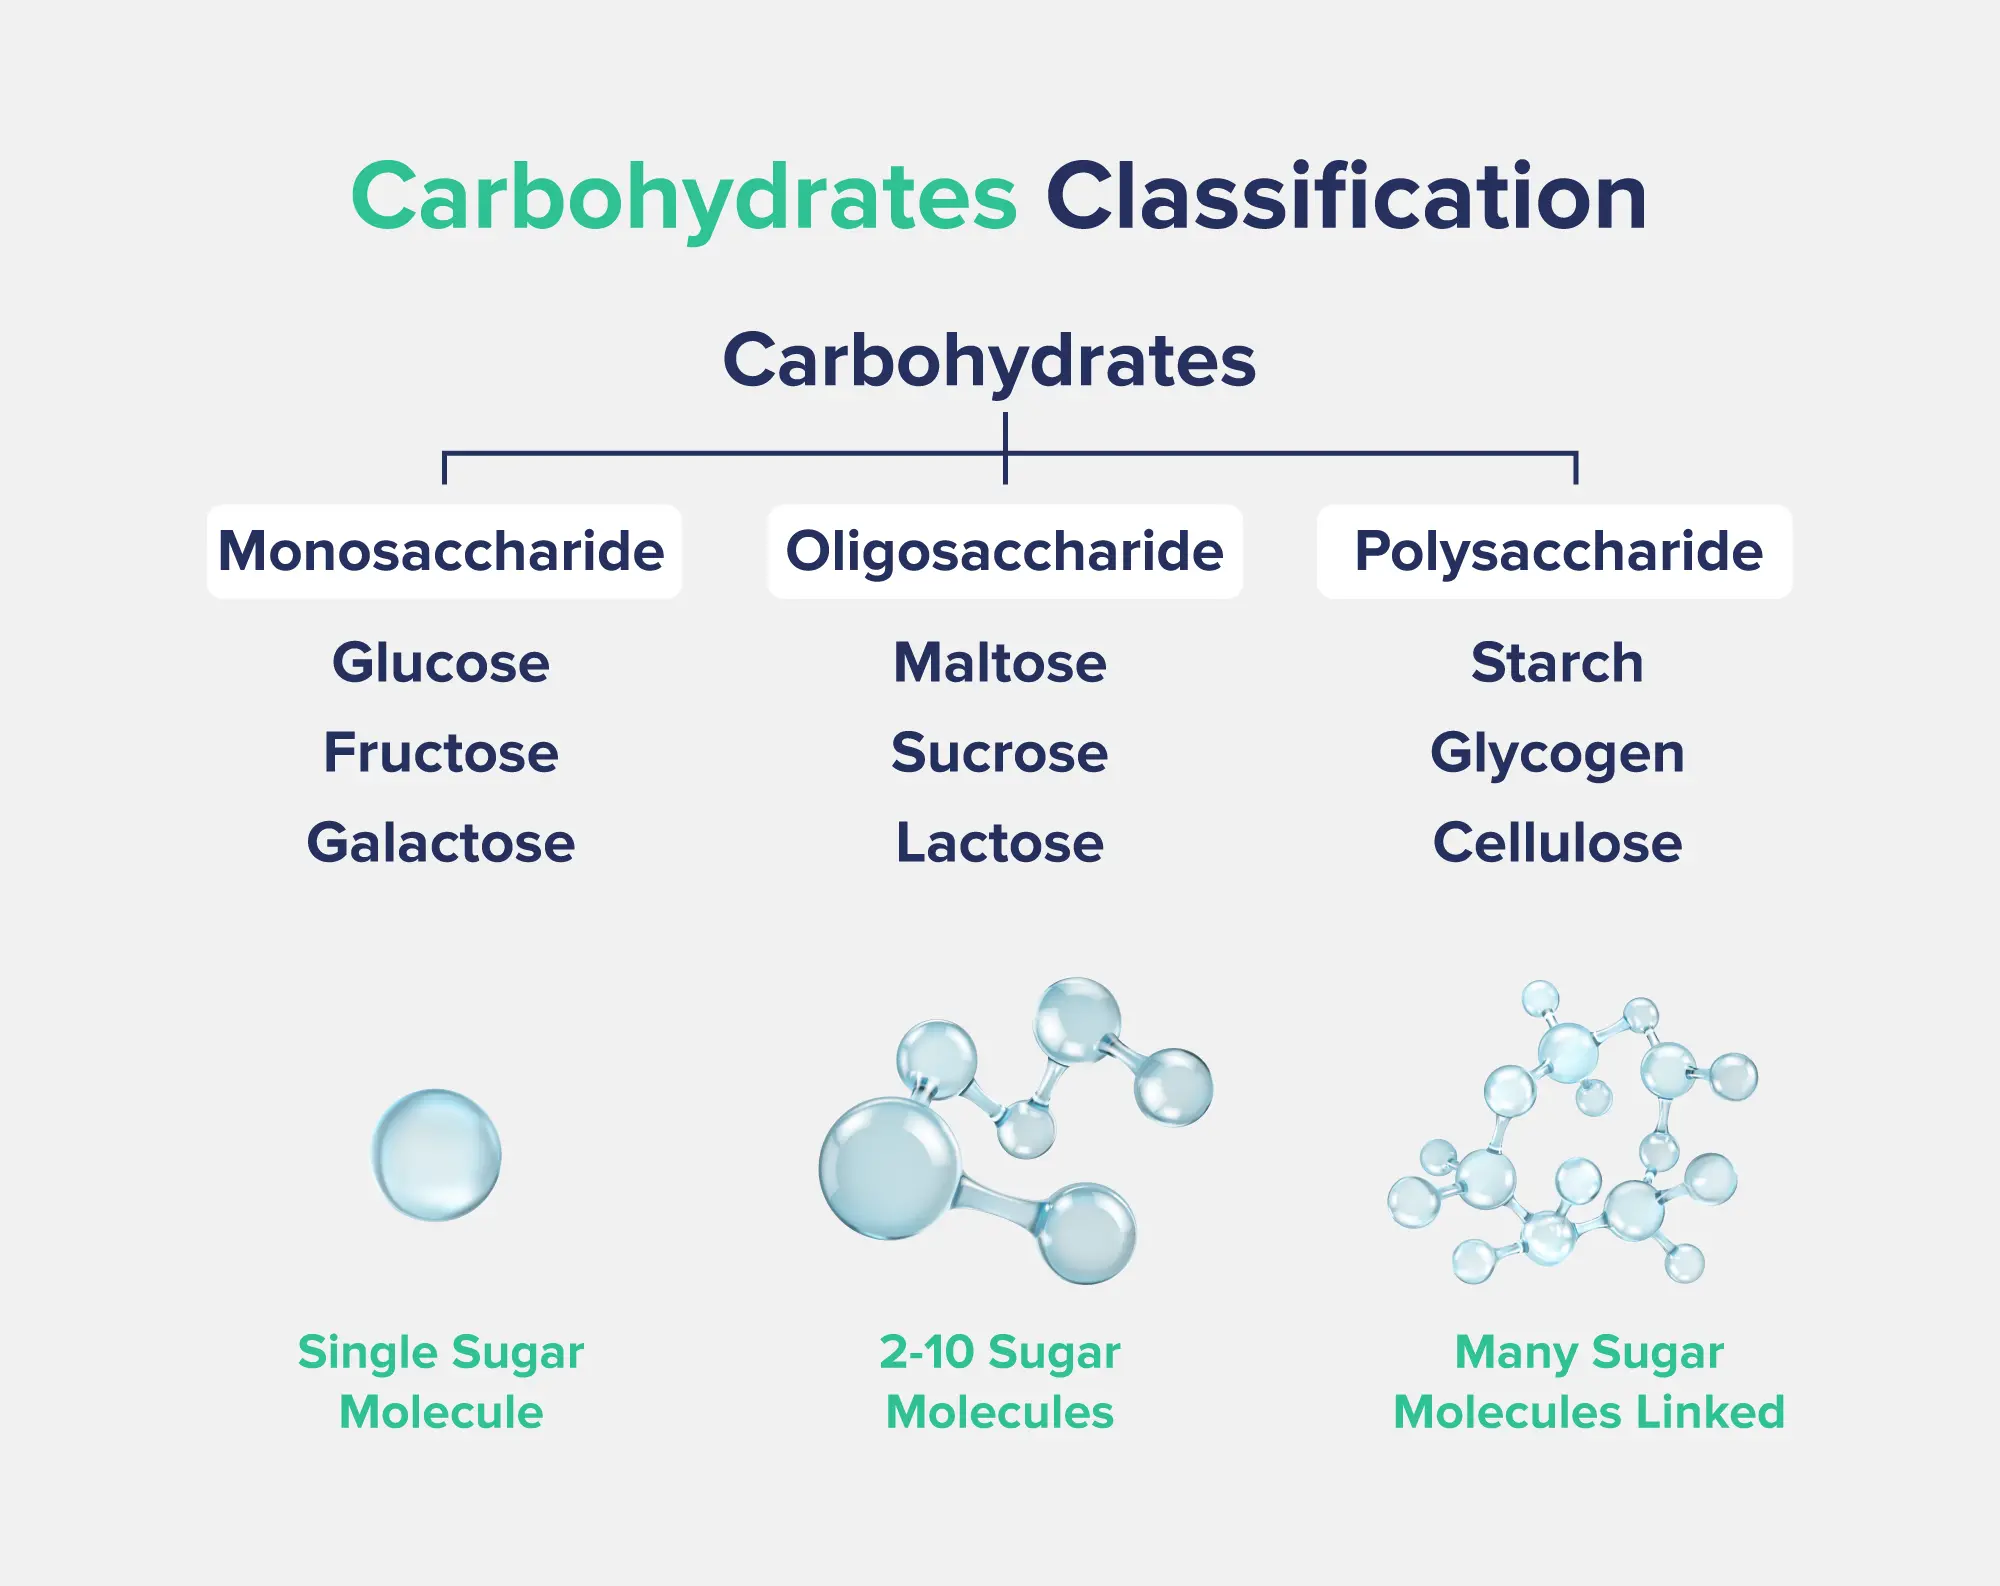 A graphic entitled "carbohydrates classification" with the three major types of carbohydrates presented alongside corresponding images: monosaccharides, oligosaccharides, and polysaccharides